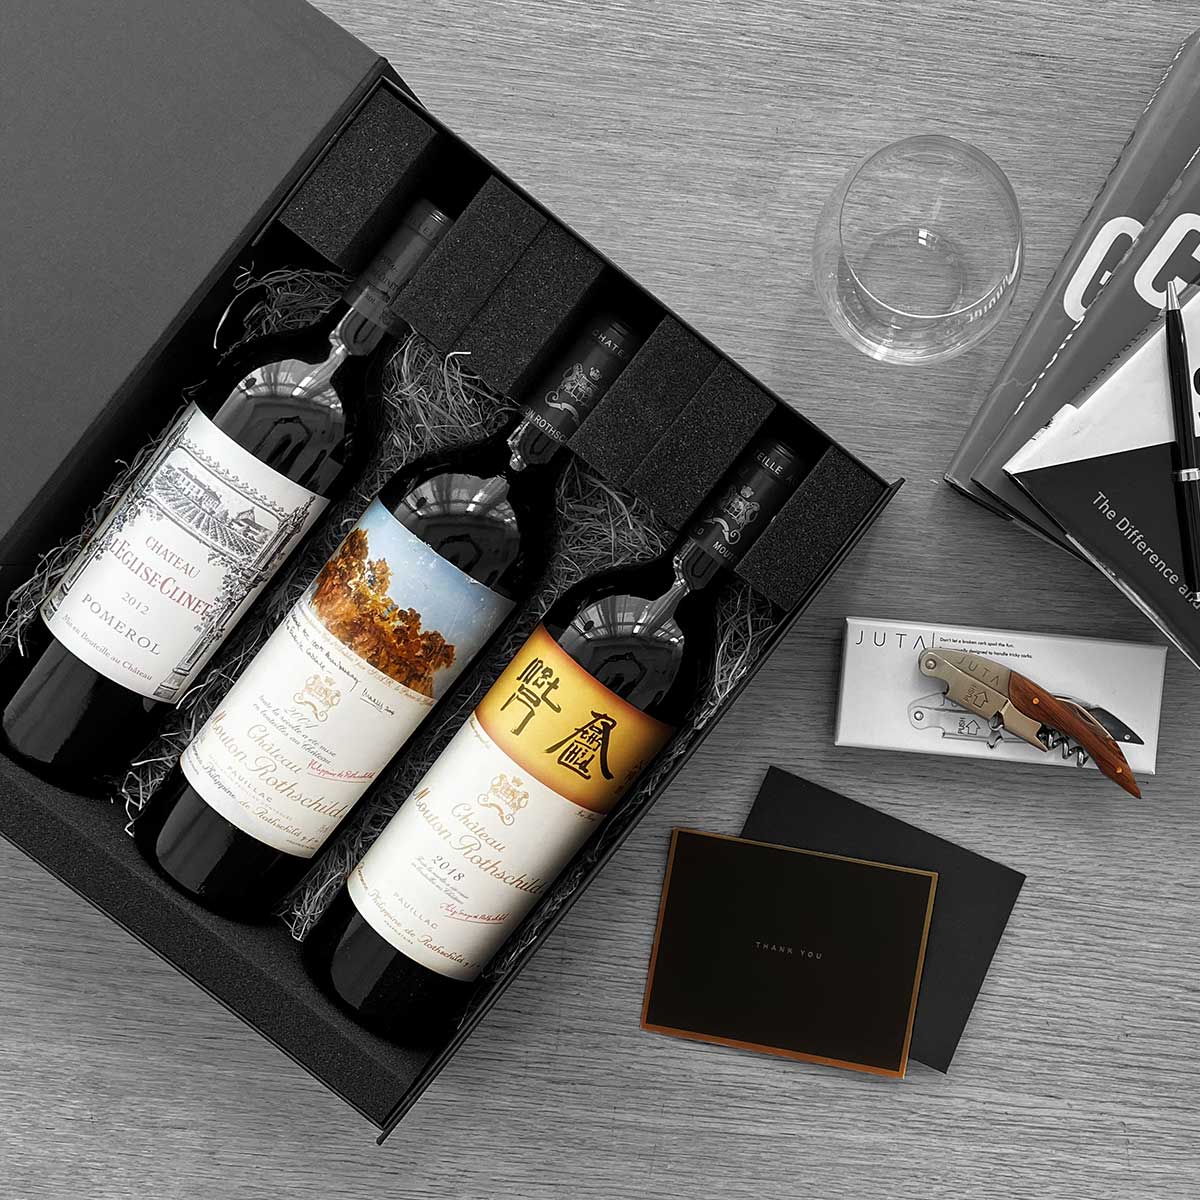 Corporate gifting with Wines Online Singapore